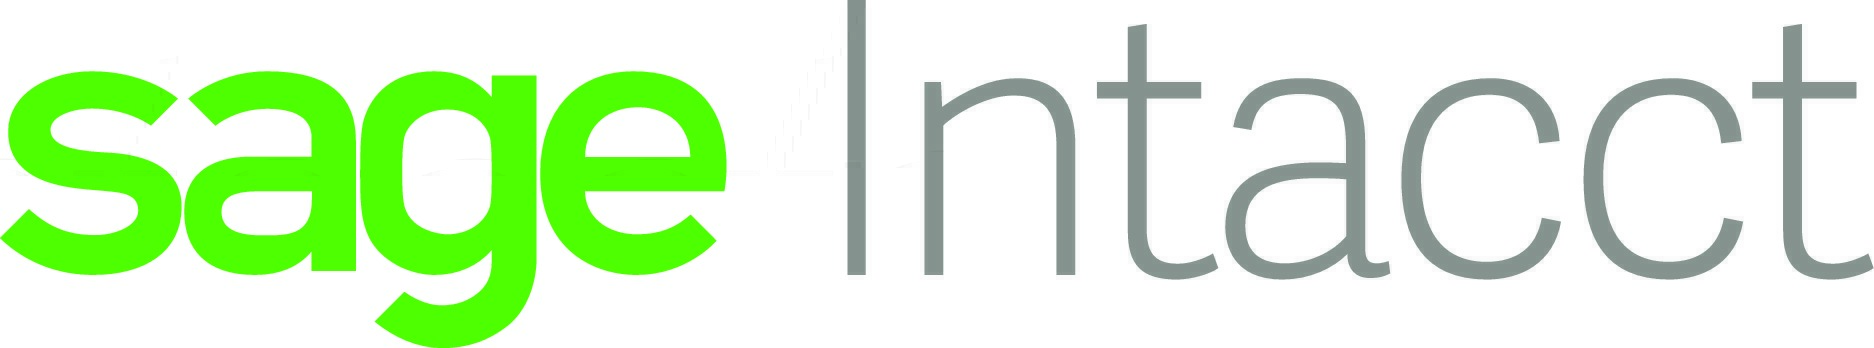 Intacct Cloud Accounting Software